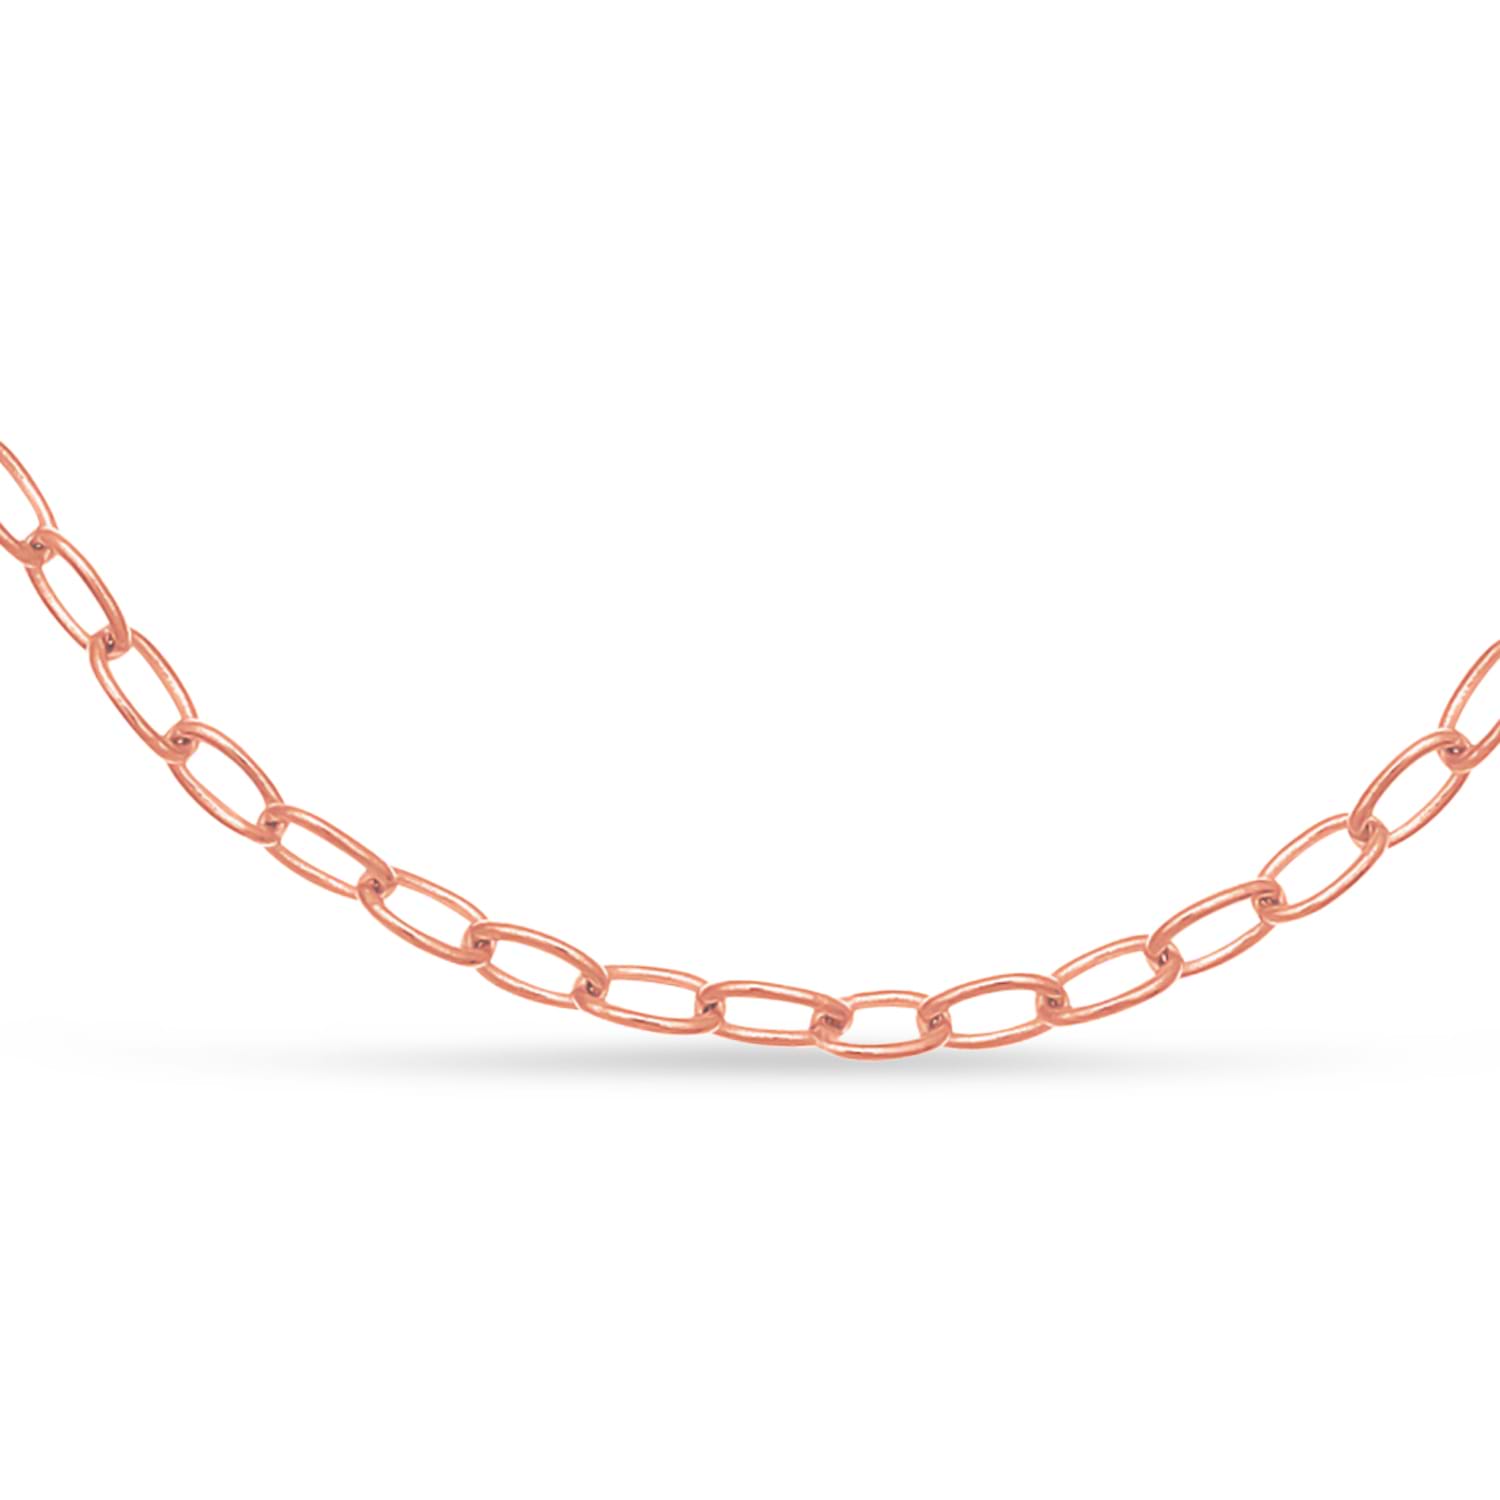 Forzentina Chain Necklace With Lobster Lock 14k Rose Gold